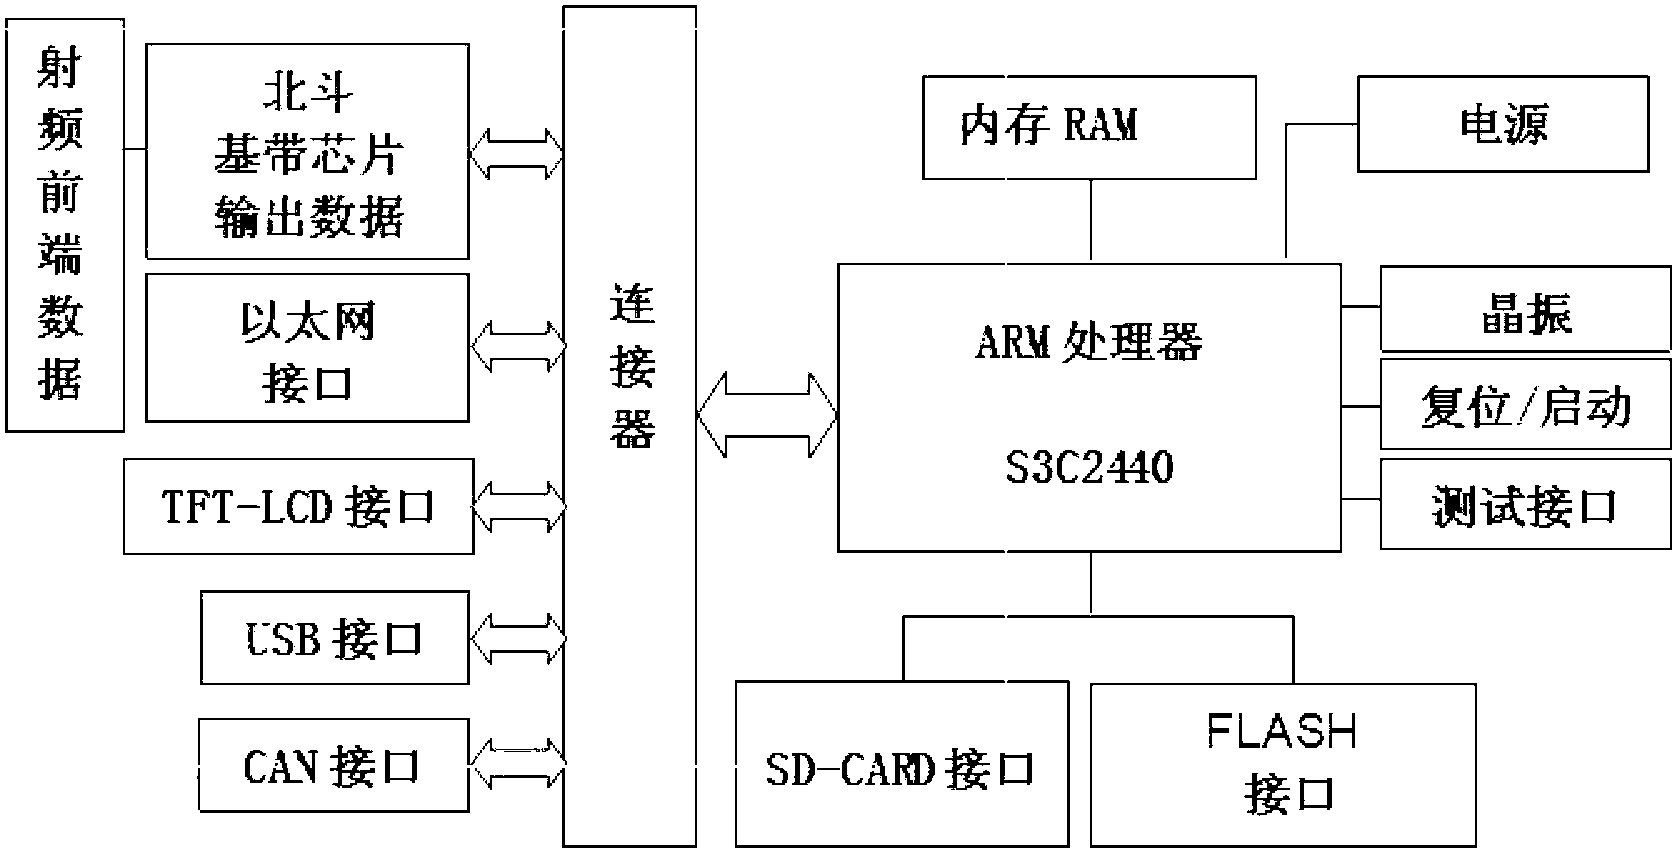 Vehicle navigation and remote service terminal, system and method based on beidou satellite system